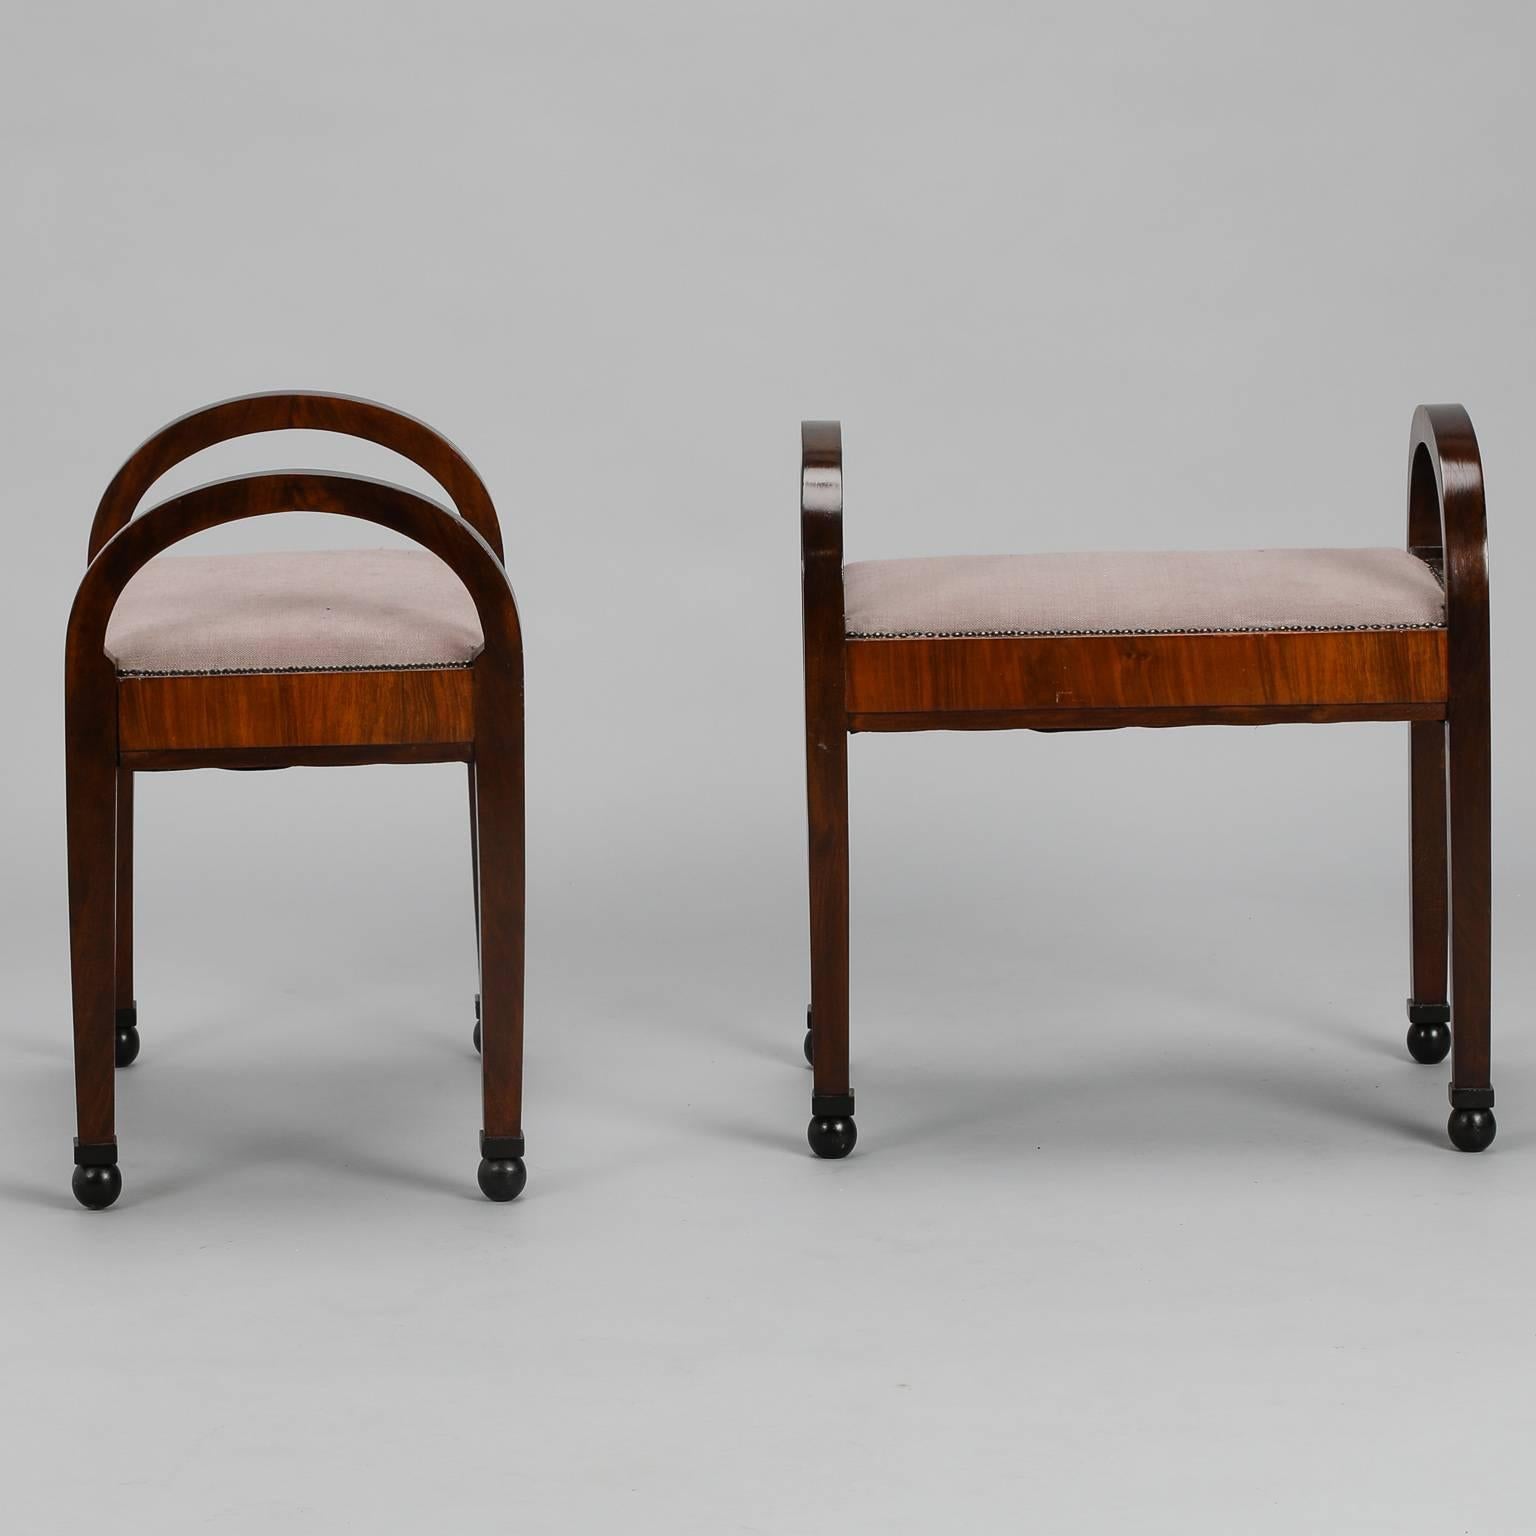 Pair of French Art Deco era polished wood benches with tall, arched sides and upholstered seats, circa 1930s. Newly upholstered seats have brass nailhead trim, ball feet and contrasting figured wood stretchers. Sold and priced as a pair.

  